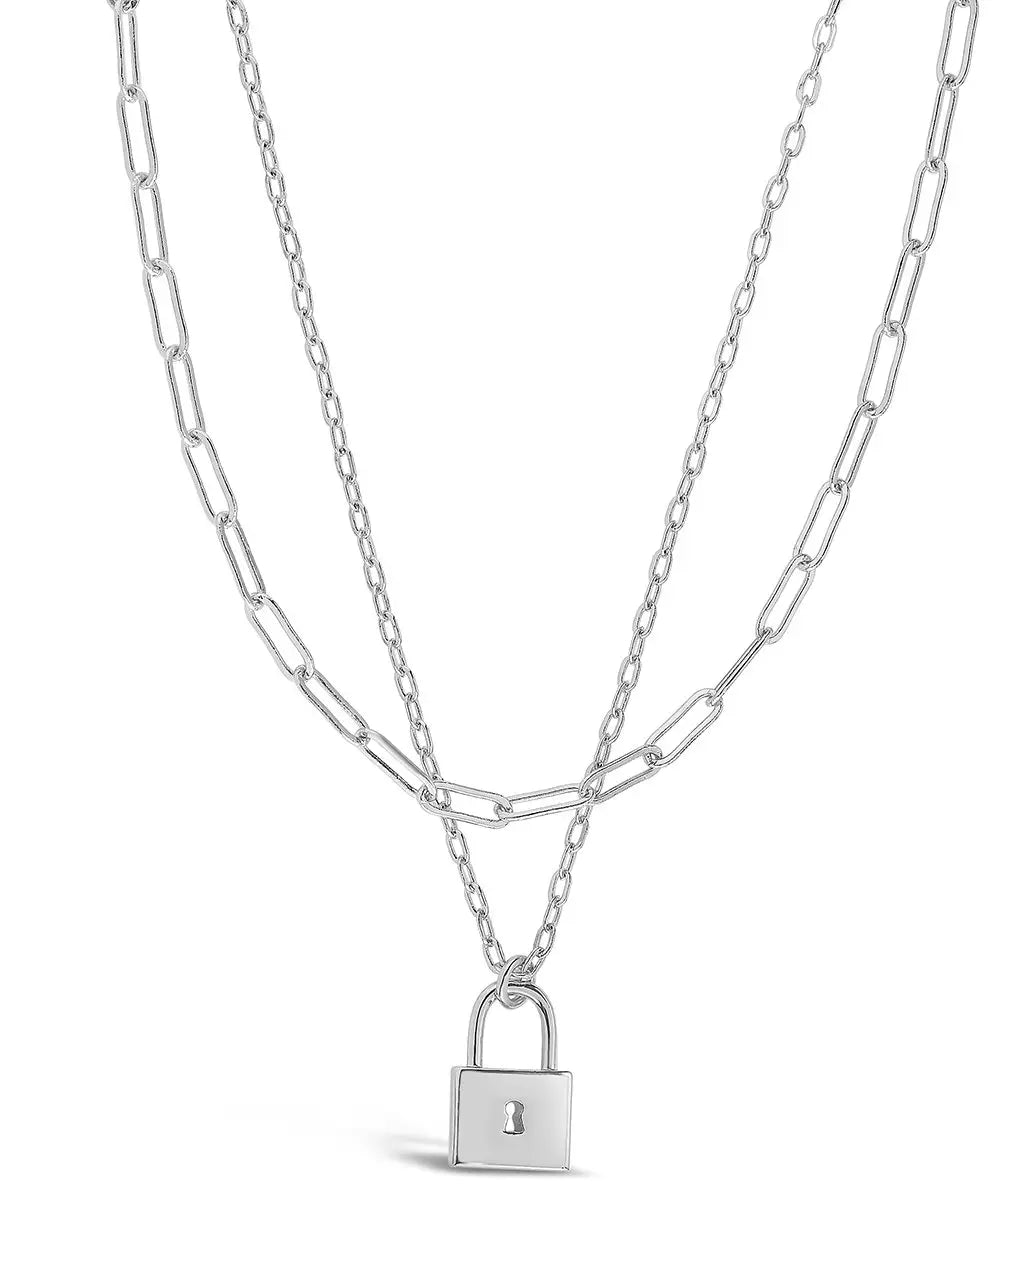 Lock & Chain Link Layered Necklace